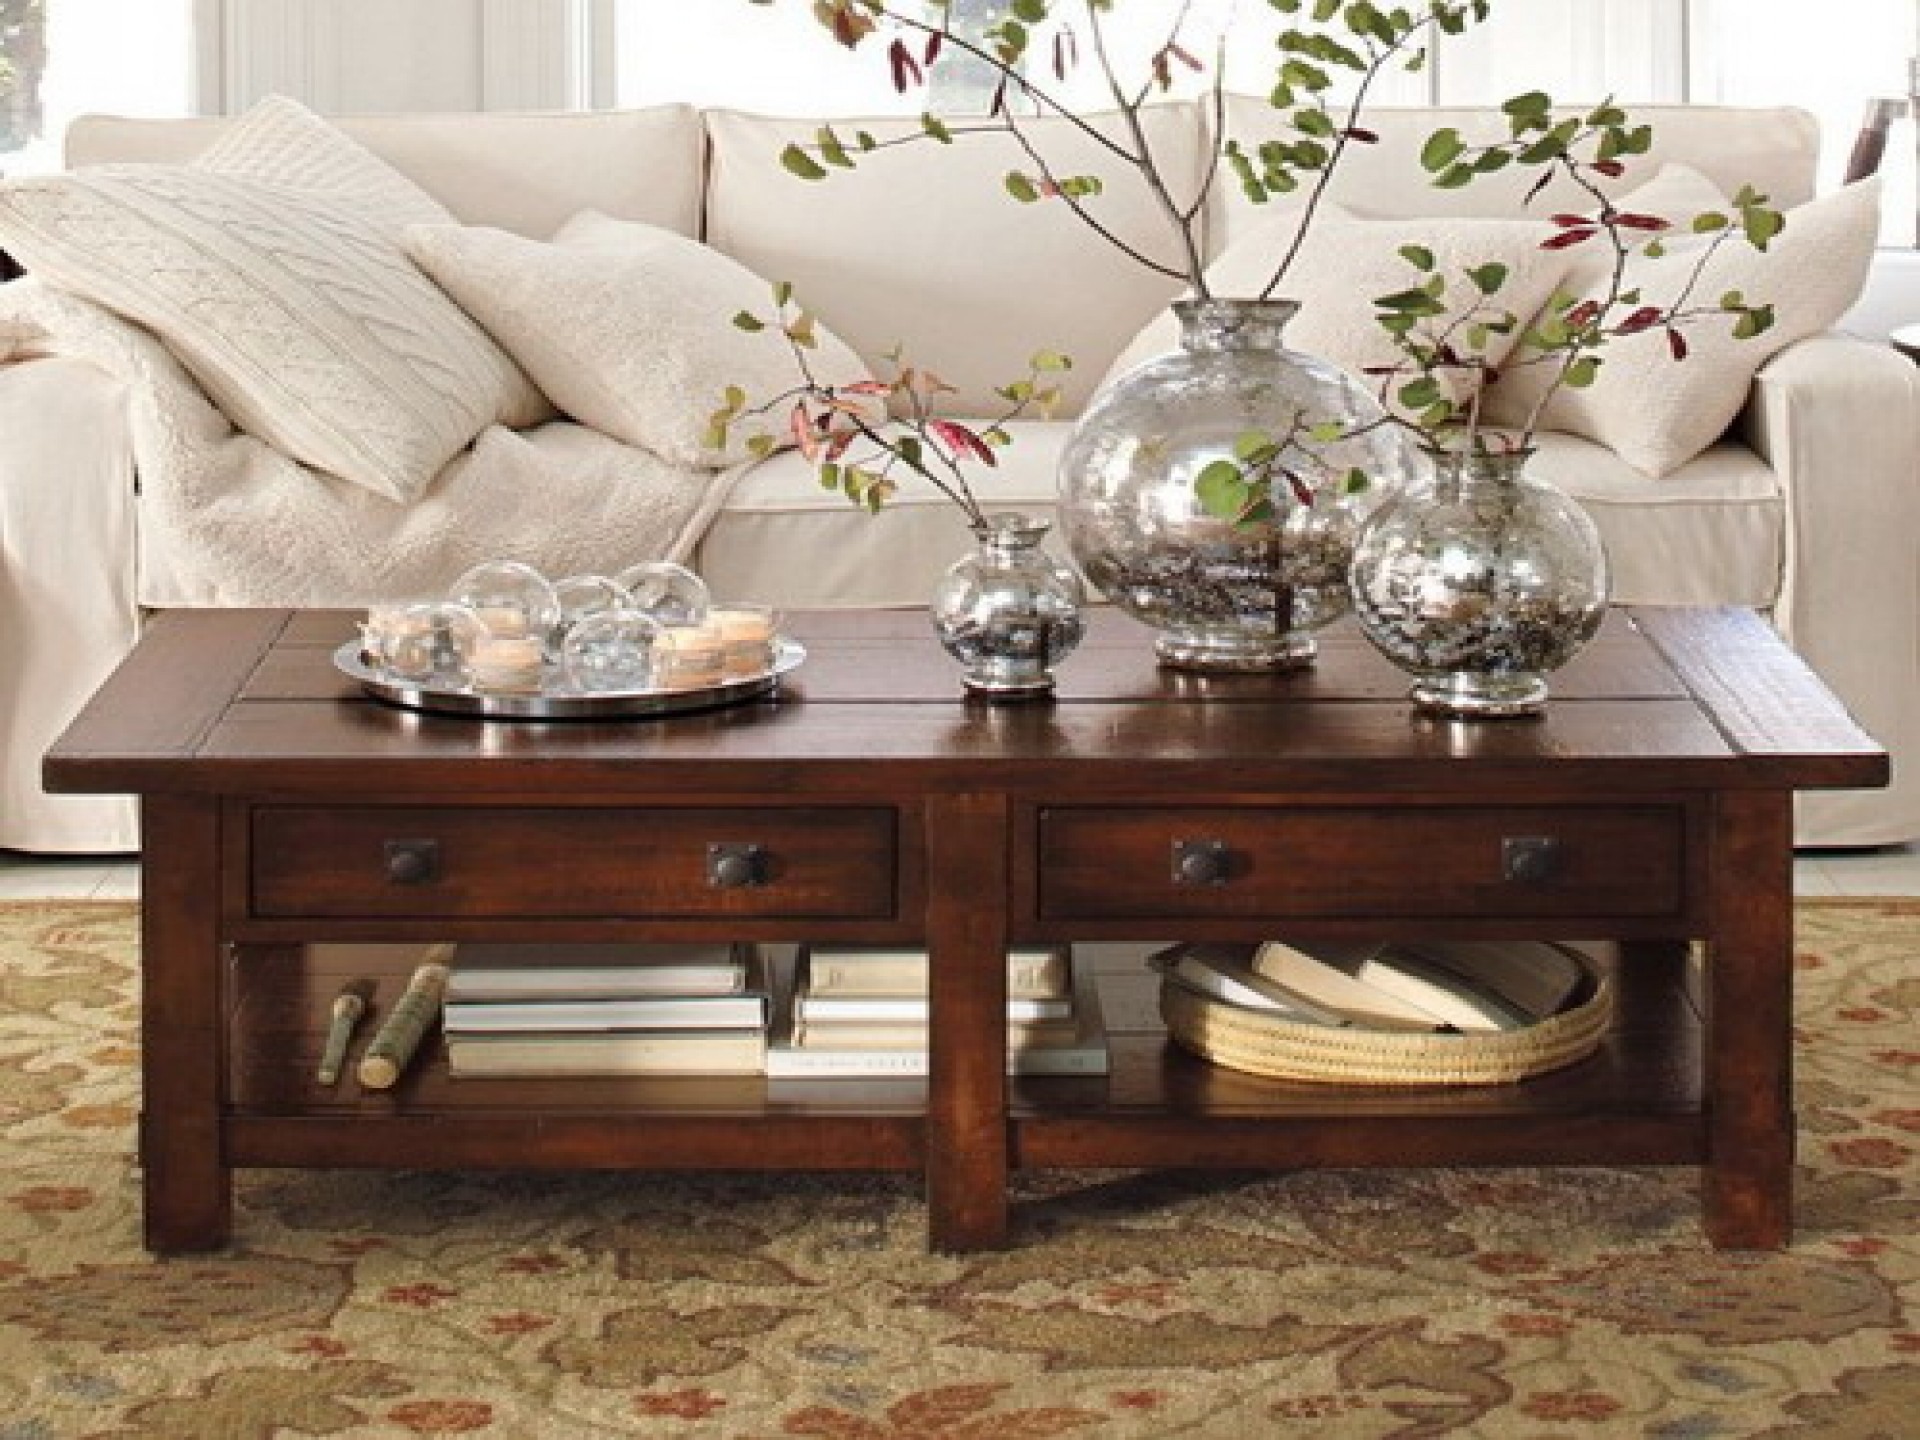 Coffee Table Accessories Design Images Photos Pictures